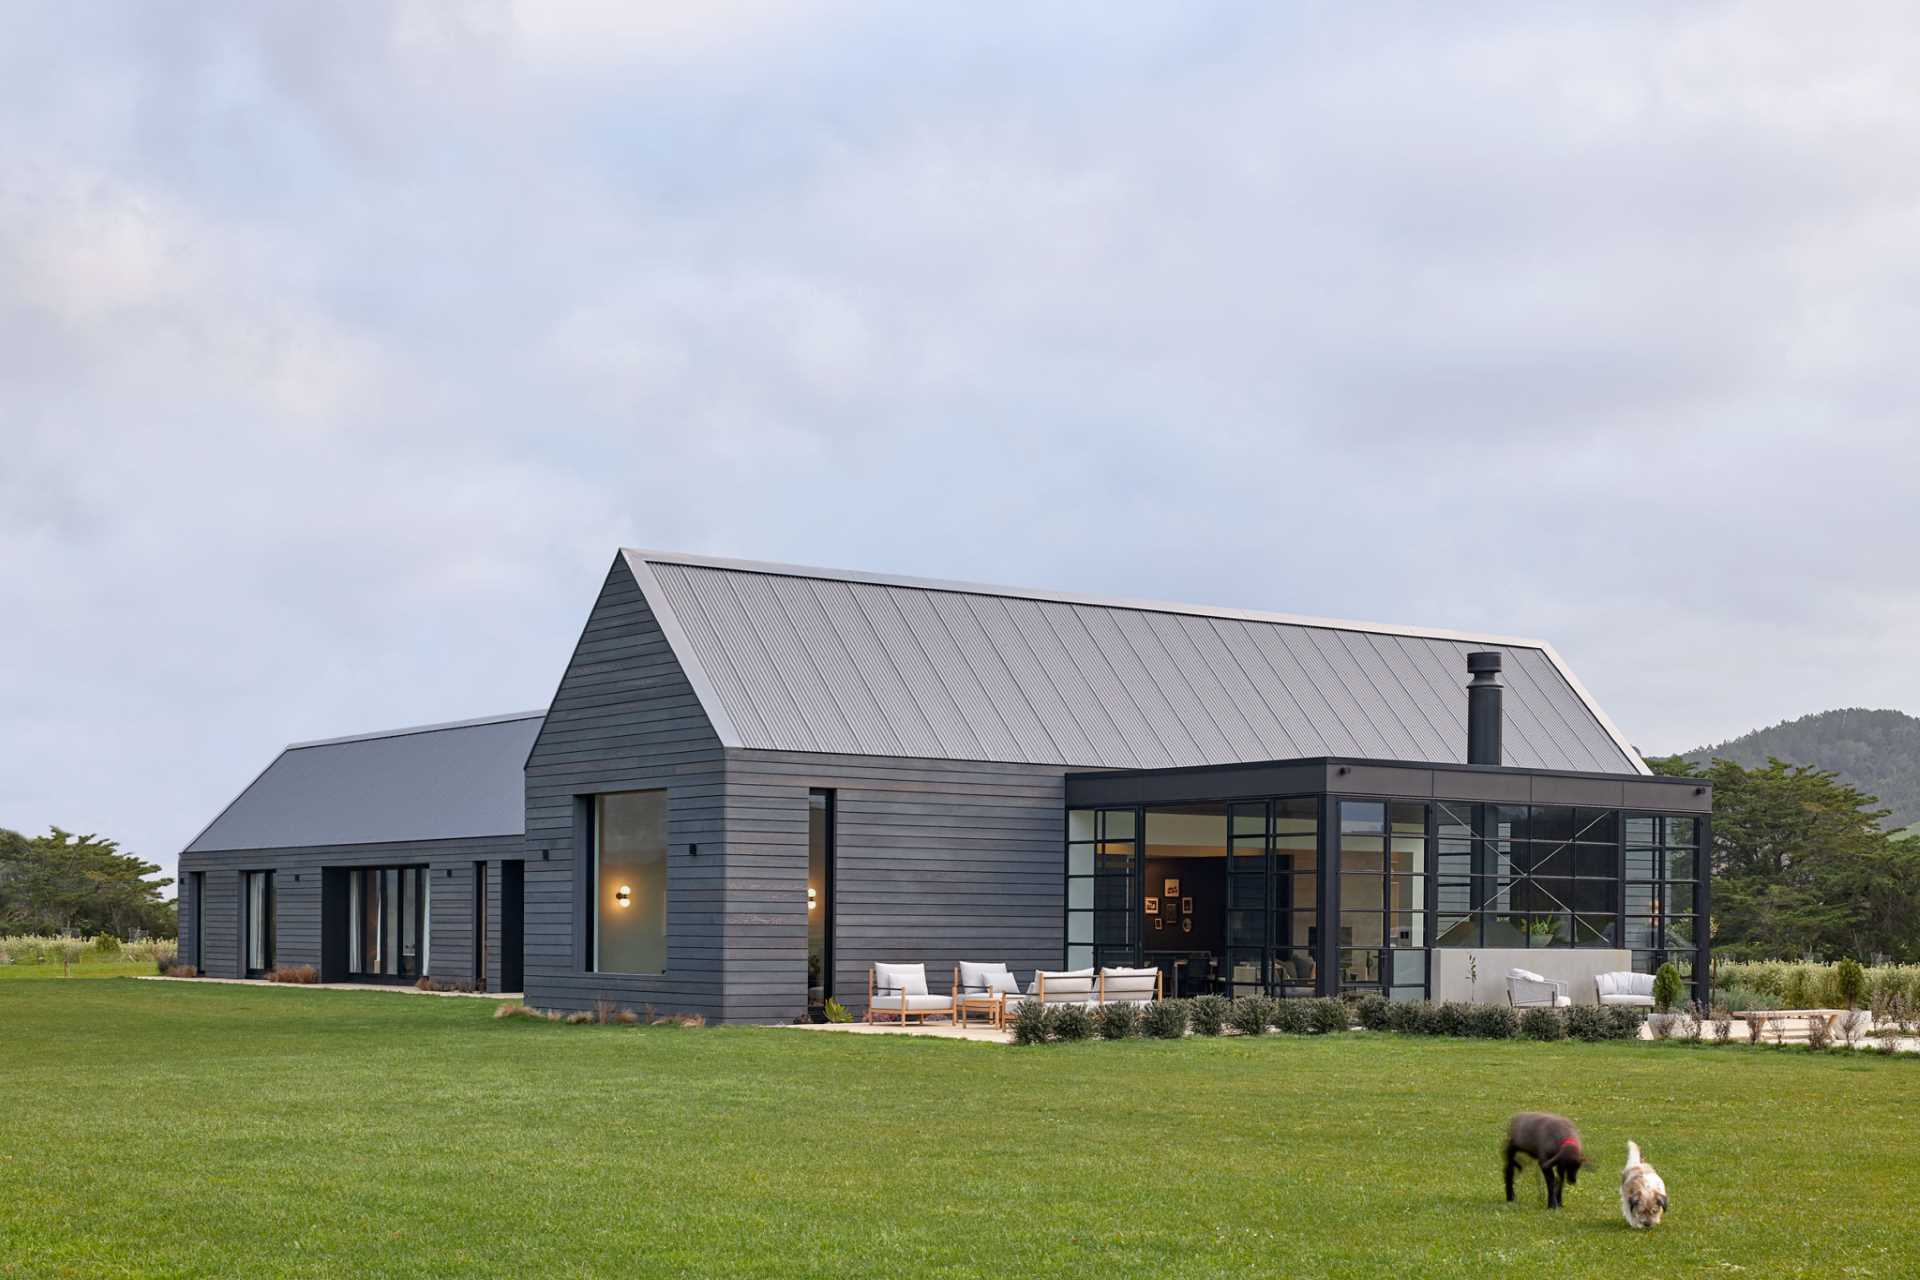 A contemporary farmhouse with grey-stained weathered wood siding and a standing seam grey metal roof.